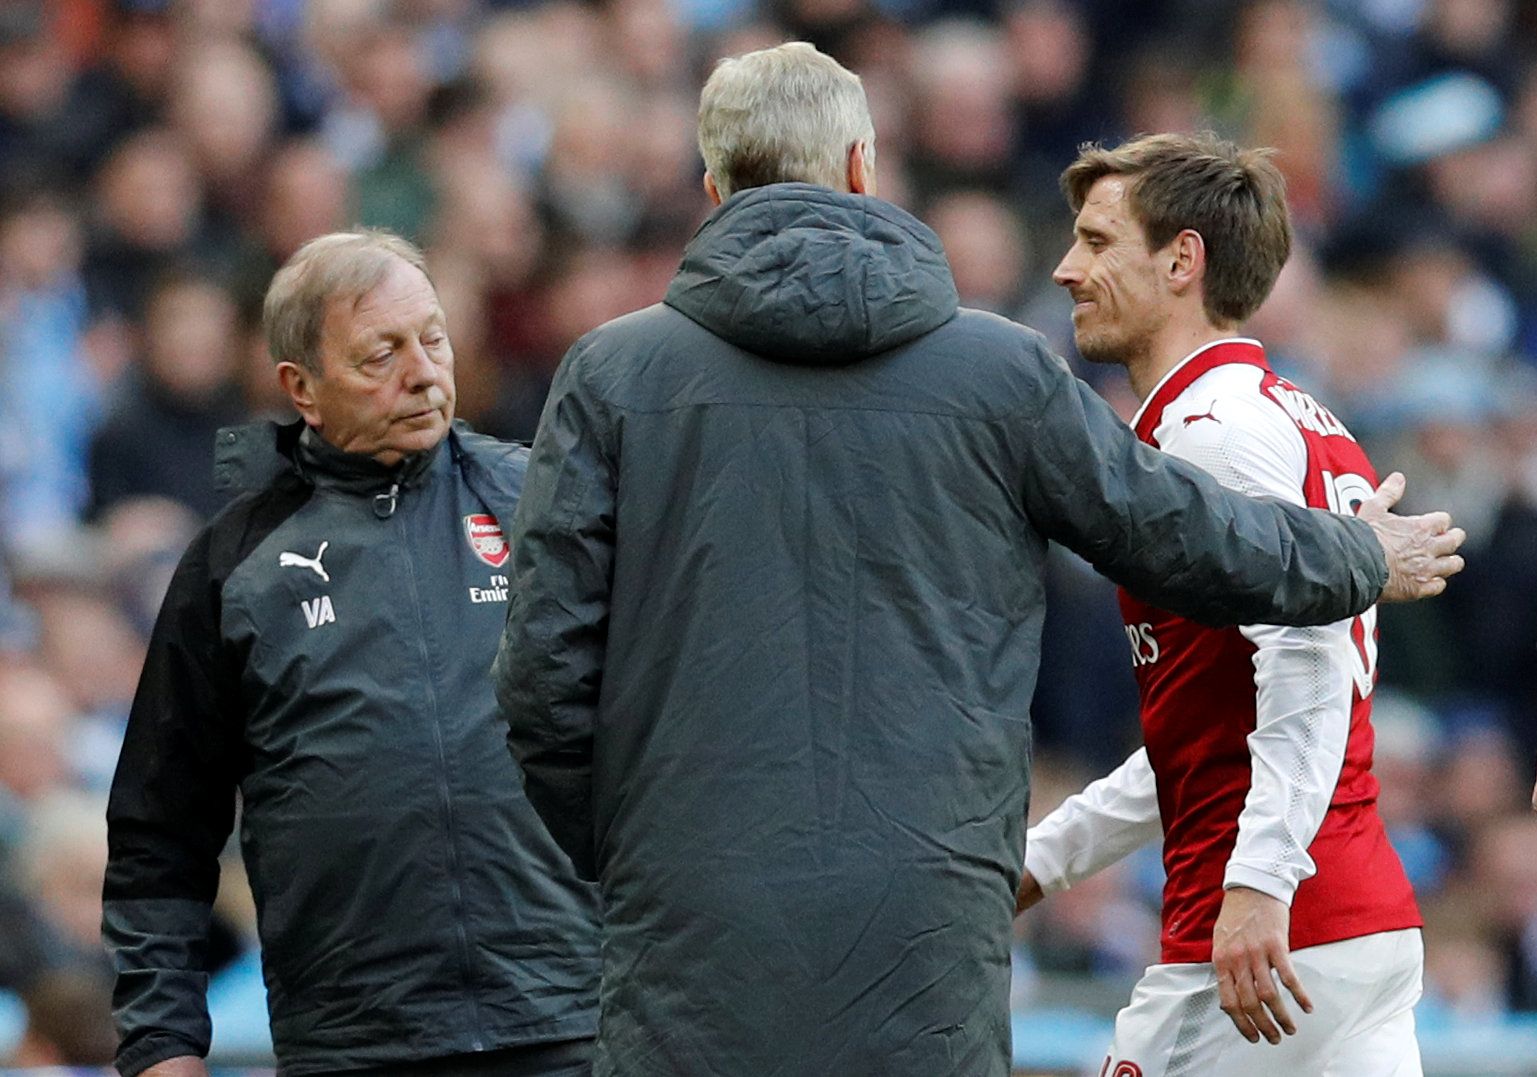 Soccer Football - Carabao Cup Final - Arsenal vs Manchester City - Wembley Stadium, London, Britain - February 25, 2018   Arsenal manager Arsene Wenger consoles Nacho Monreal as he leaves the pitch after sustaining an injury    REUTERS/Darren Staples     EDITORIAL USE ONLY. No use with unauthorized audio, video, data, fixture lists, club/league logos or 